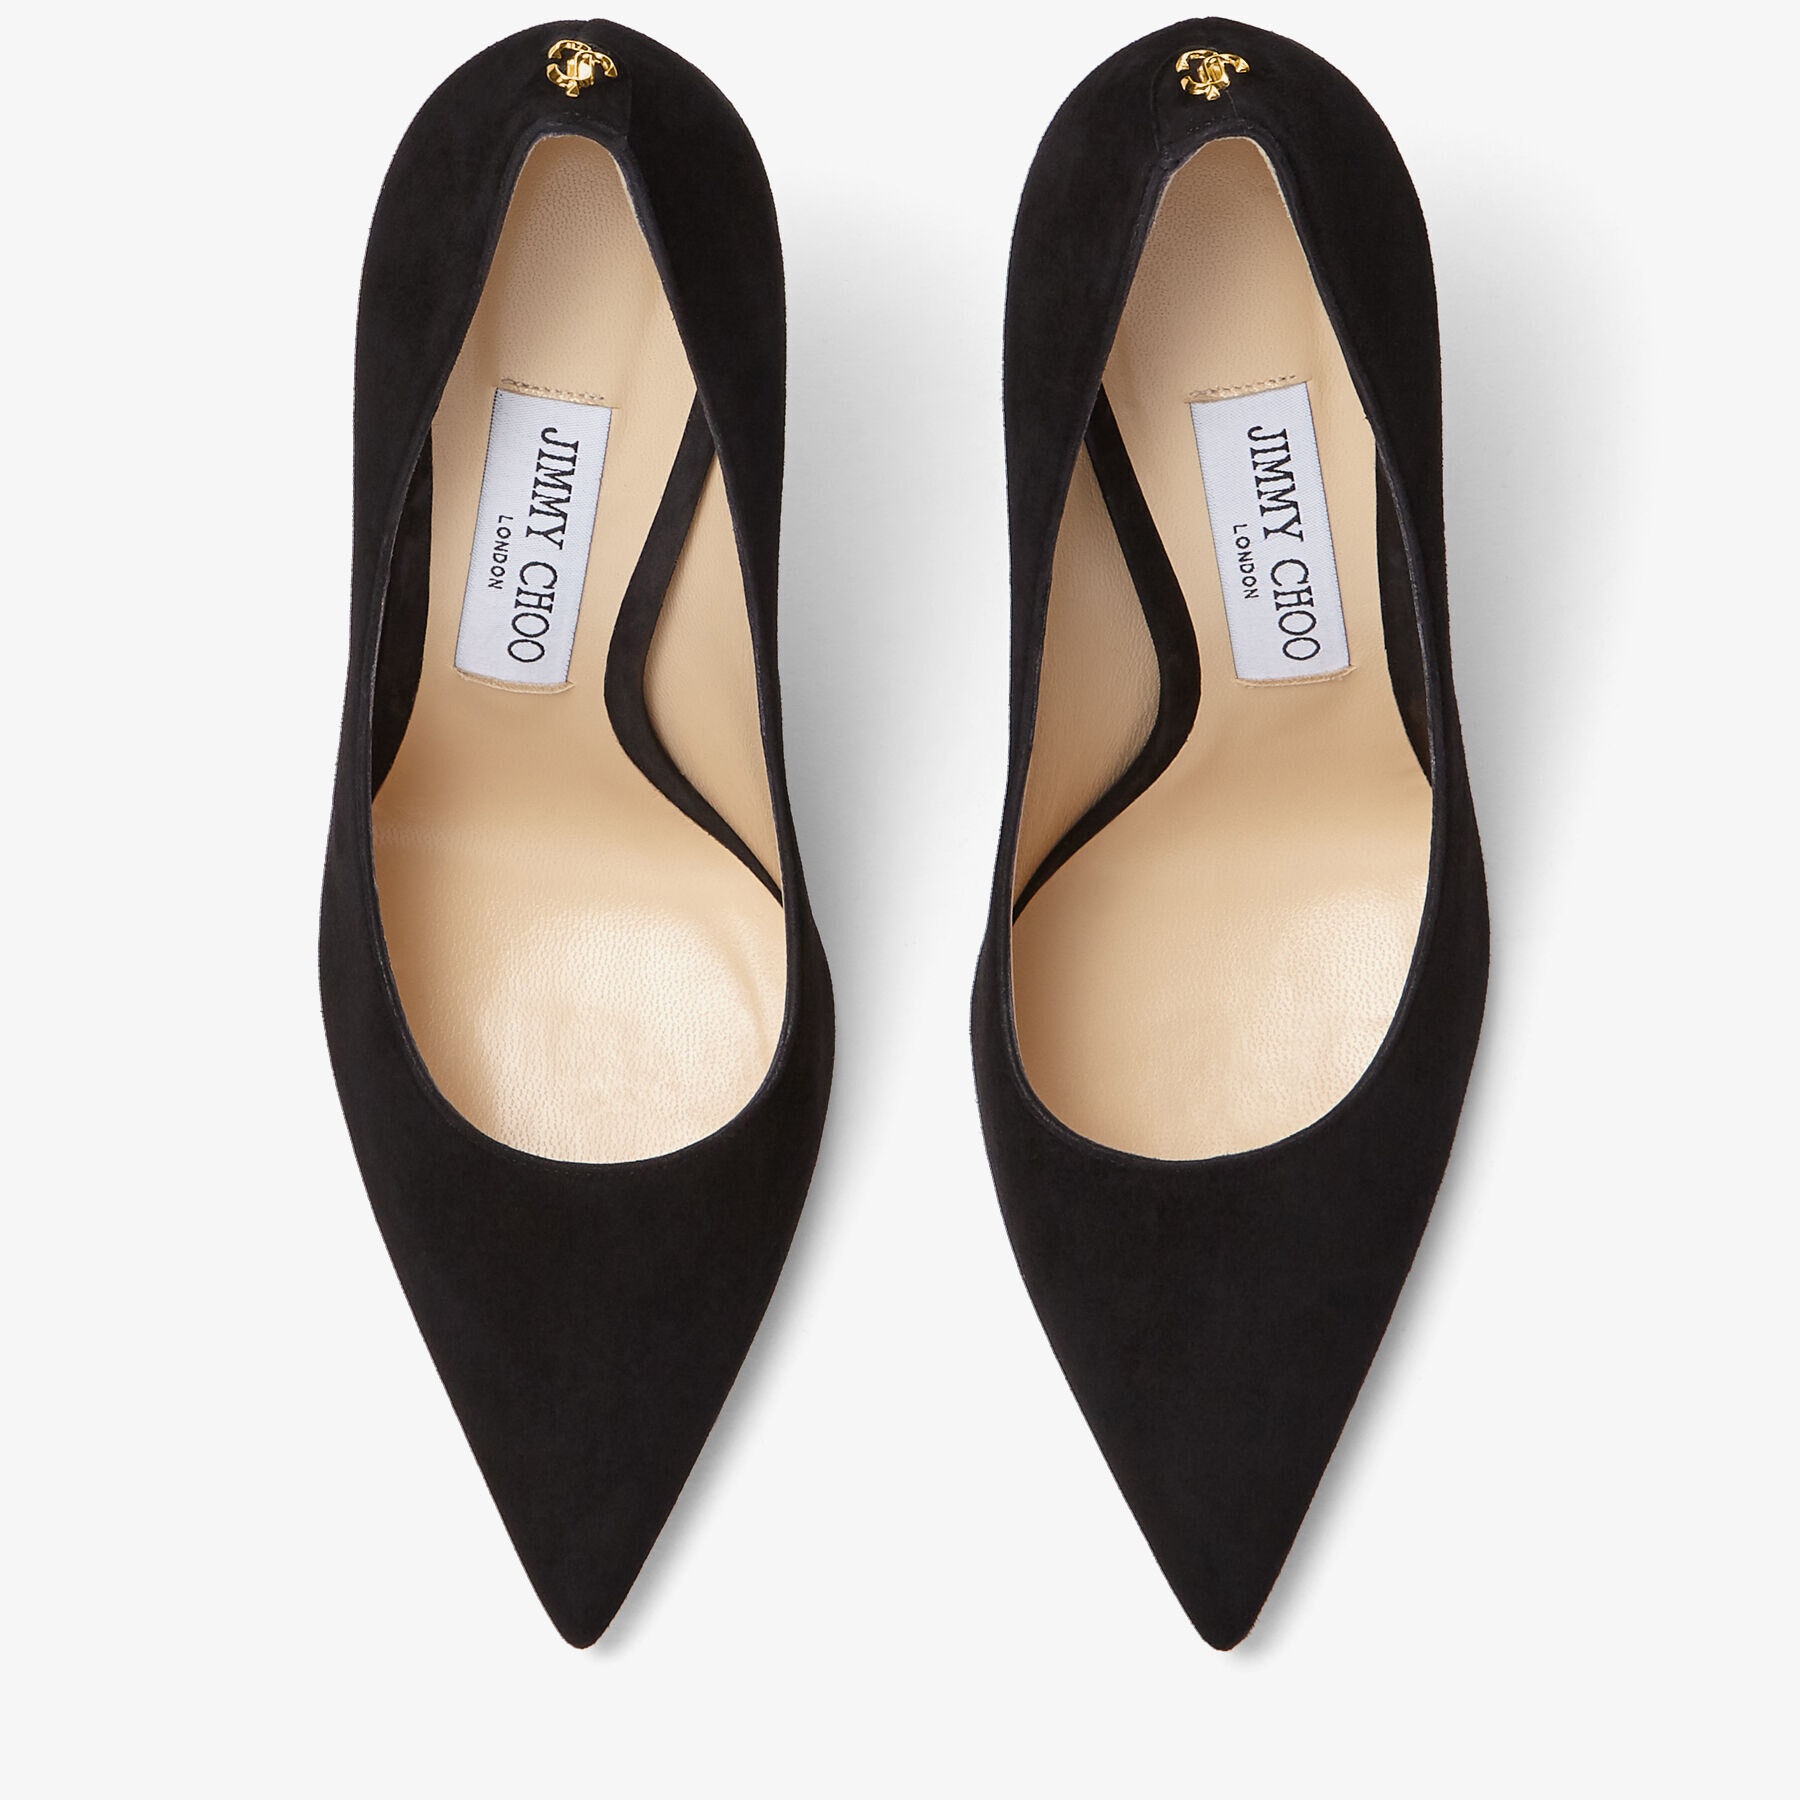 Love 100
Black Suede Pointy Toe Pumps with Jimmy Choo Button - 5